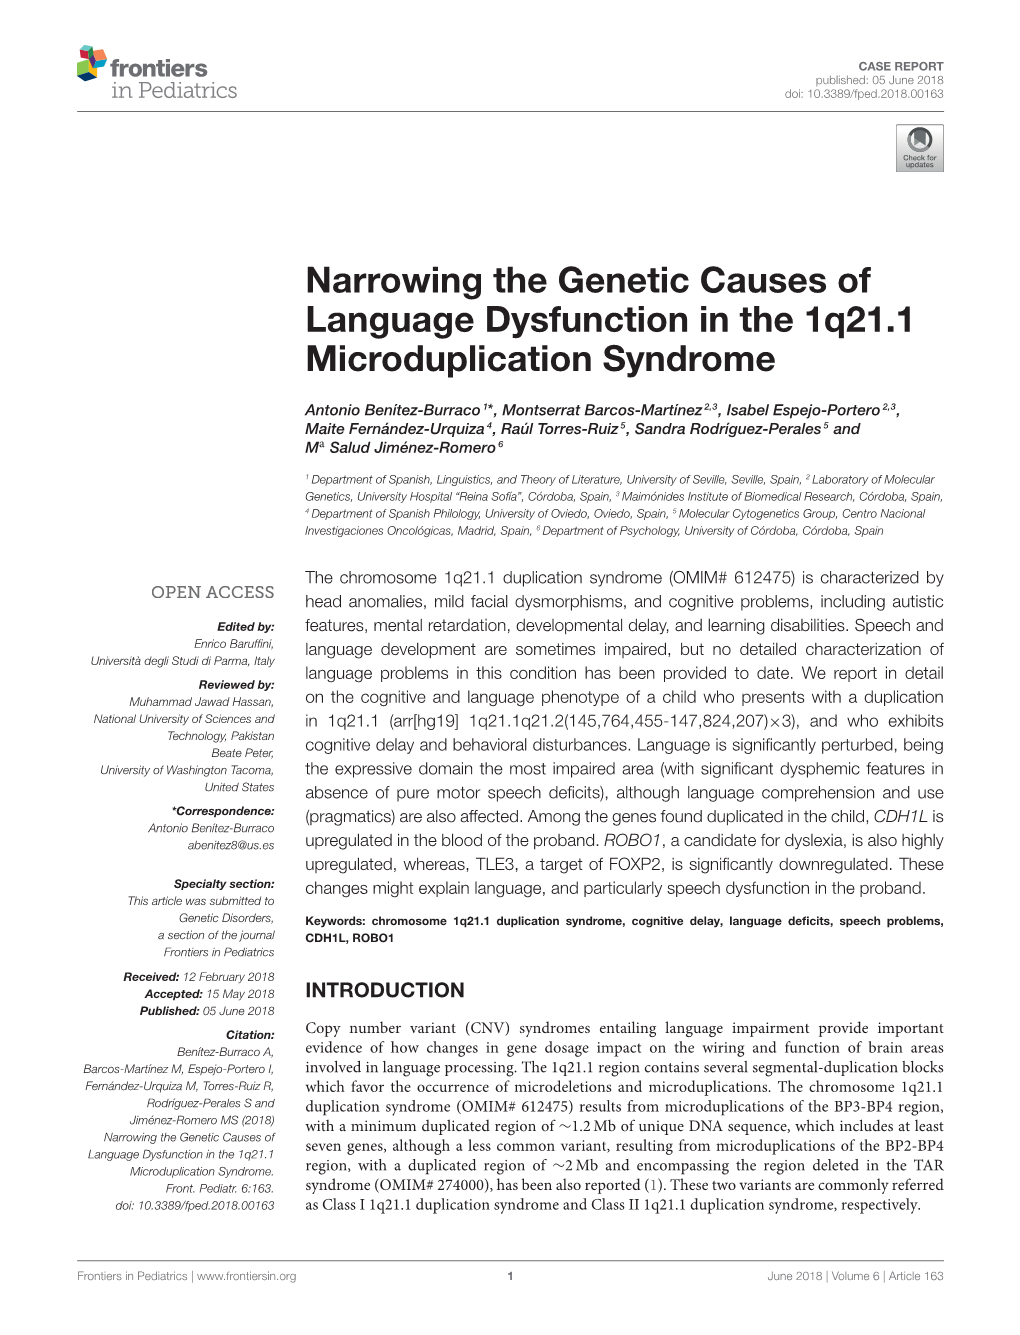 Narrowing the Genetic Causes of Language Dysfunction in the 1Q21.1 Microduplication Syndrome